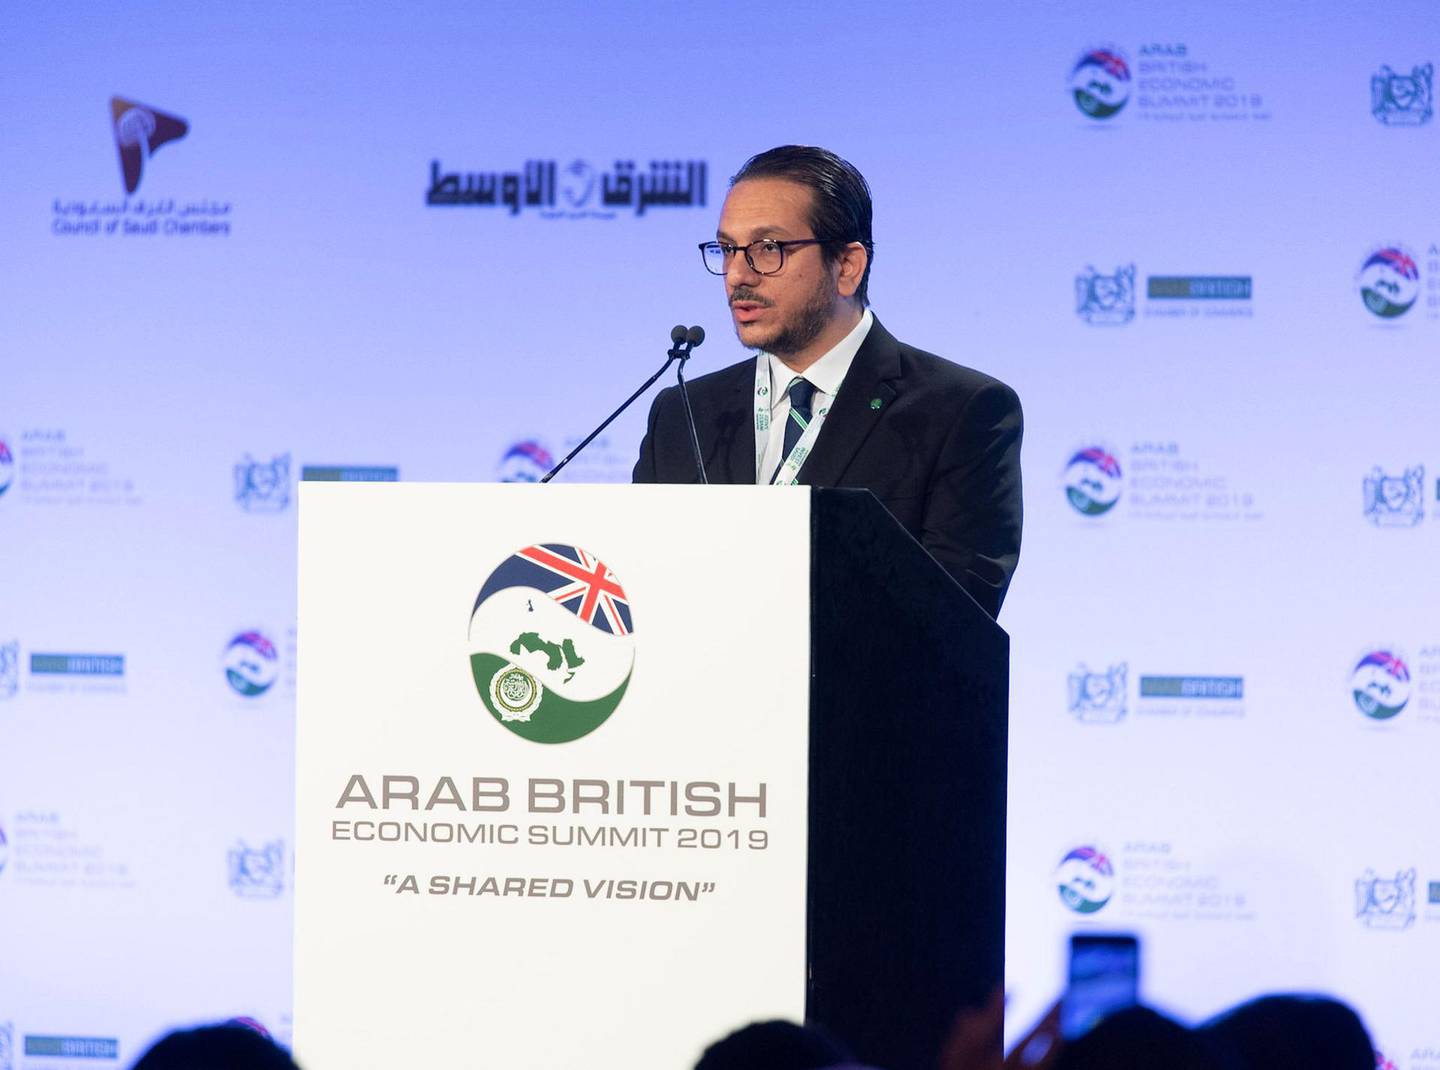 As Secretary-General and CEO, Bandar Reda focuses on growing the membership of the Arab-British Chamber of Commerce, strengthening bilateral relations, extending collaboration from traditional partnerships, and amplifying the voice of the Arab community in the UK. Courtesy Arab-British Chamber of Commerce  